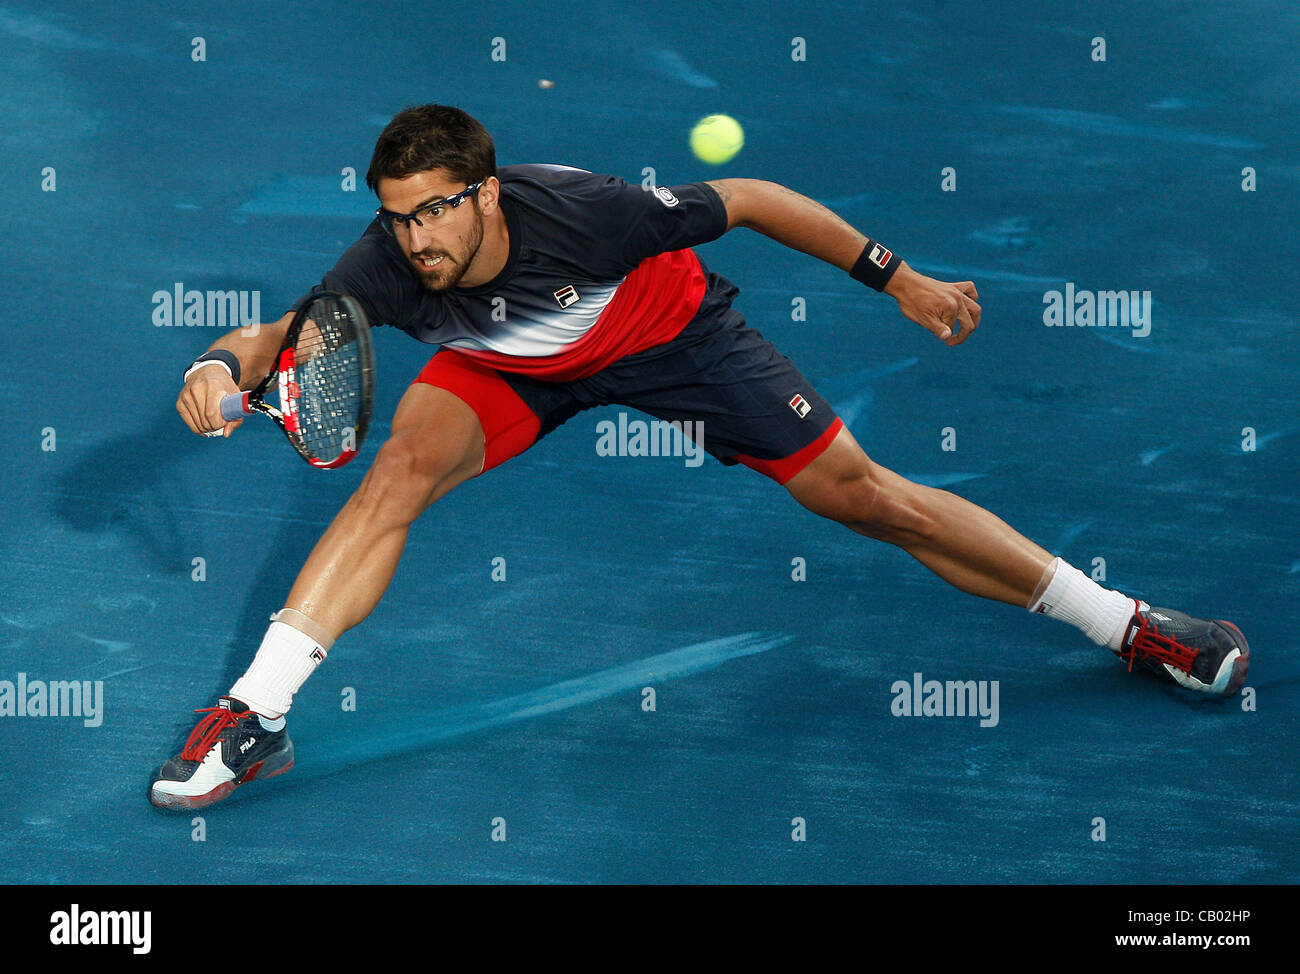 May 11, 2012 - Madrid, Spain - 11.05.2012 Madrid, Spain. Janko Tipsarevic  in action against Novak Djokovic during the  quarter finals of the Madrid Open Tennis Tournament. (Credit Image: © Michael Cullen/ZUMAPRESS.com) Stock Photo